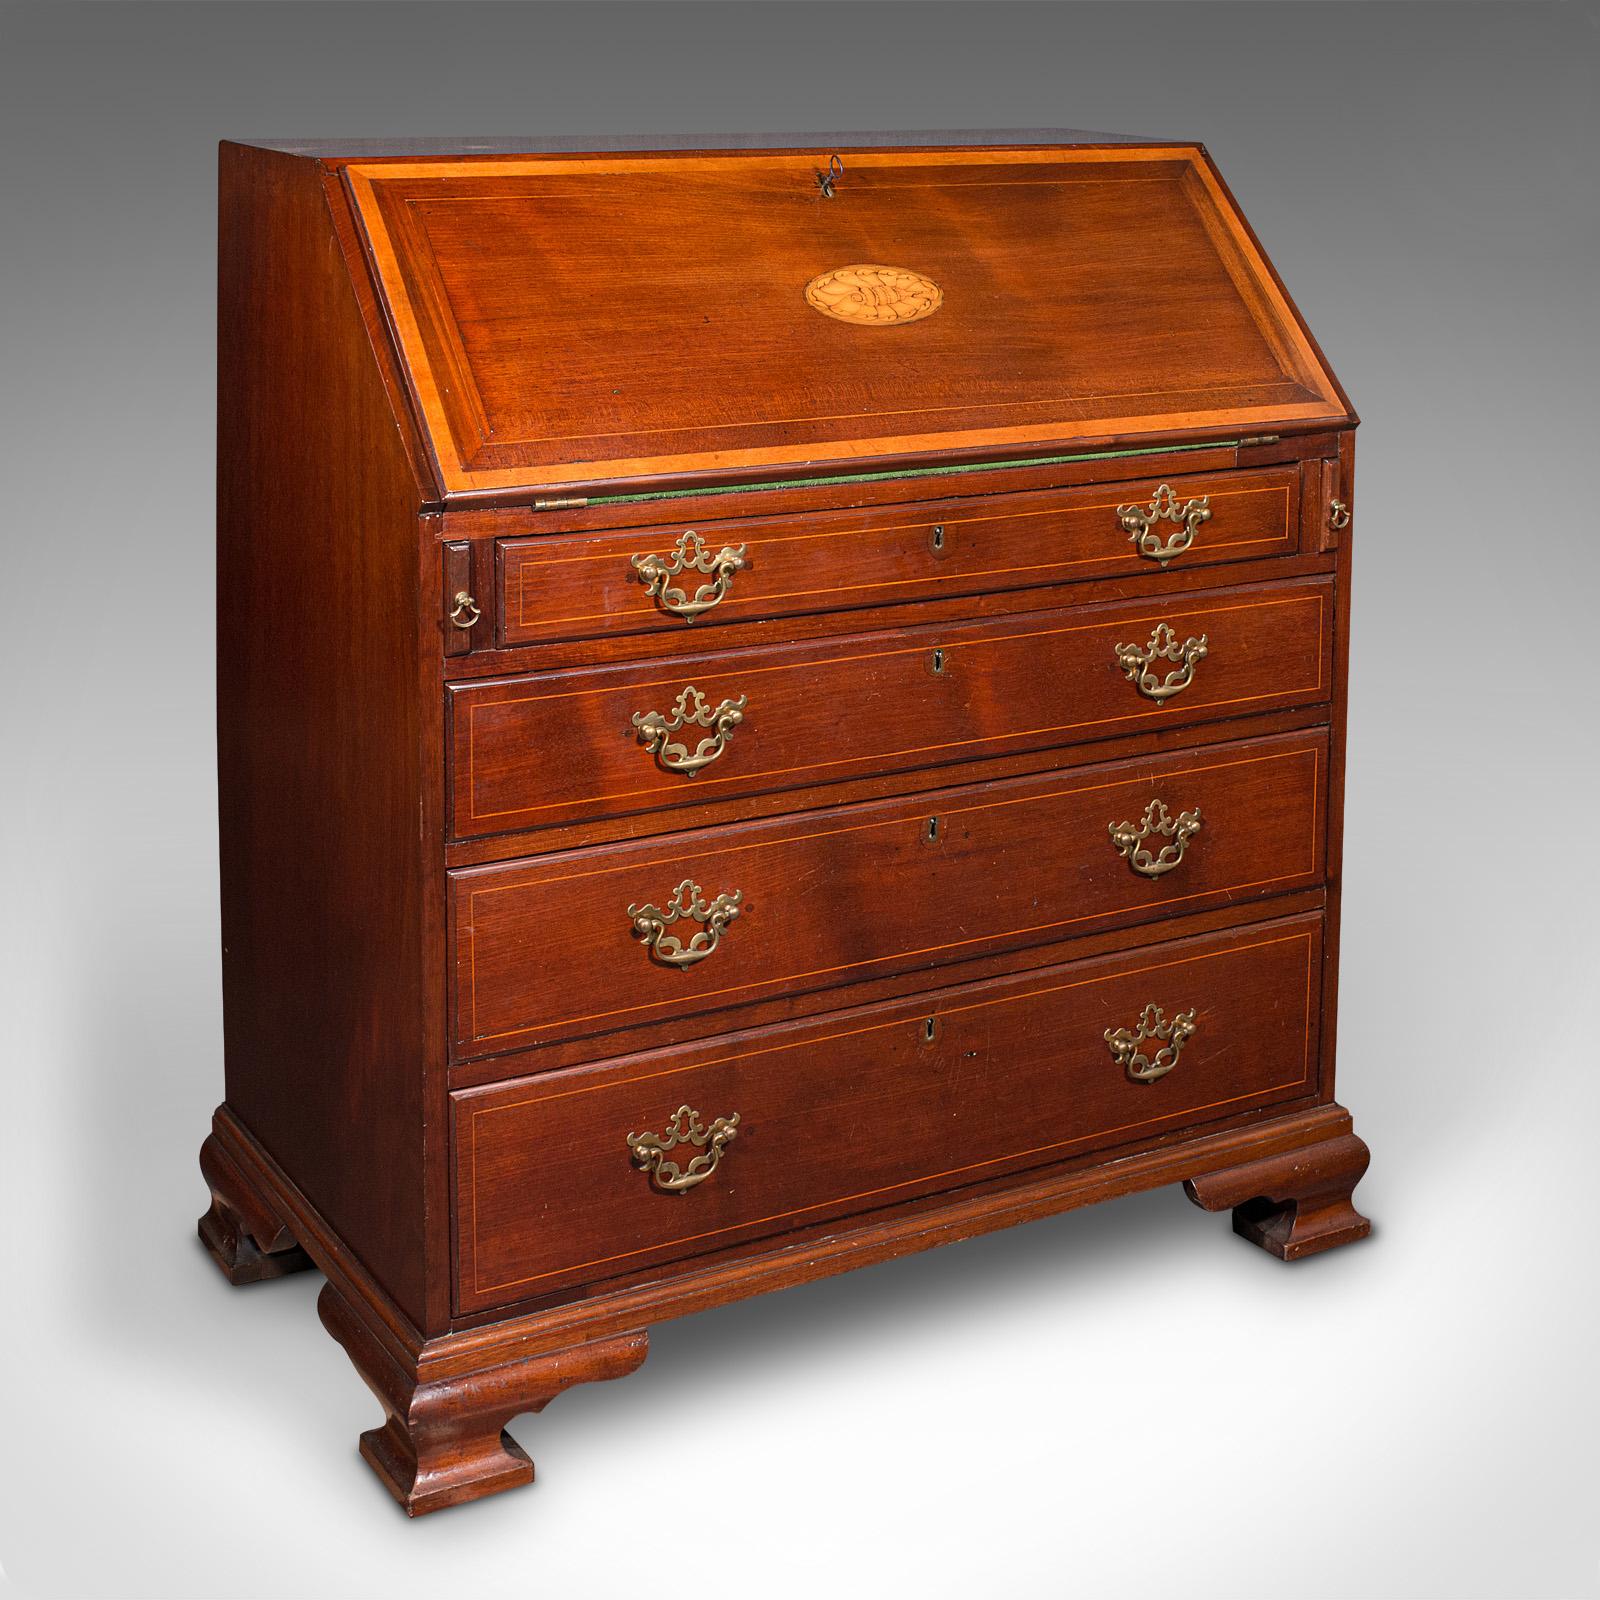 This is an antique fall front bureau. A Scottish, mahogany writing desk in Georgian revival taste by Japp of Montrose, dating to the late Victorian period, circa 1870.

Fine example of Scottish craftsmanship, with a superb finish and well